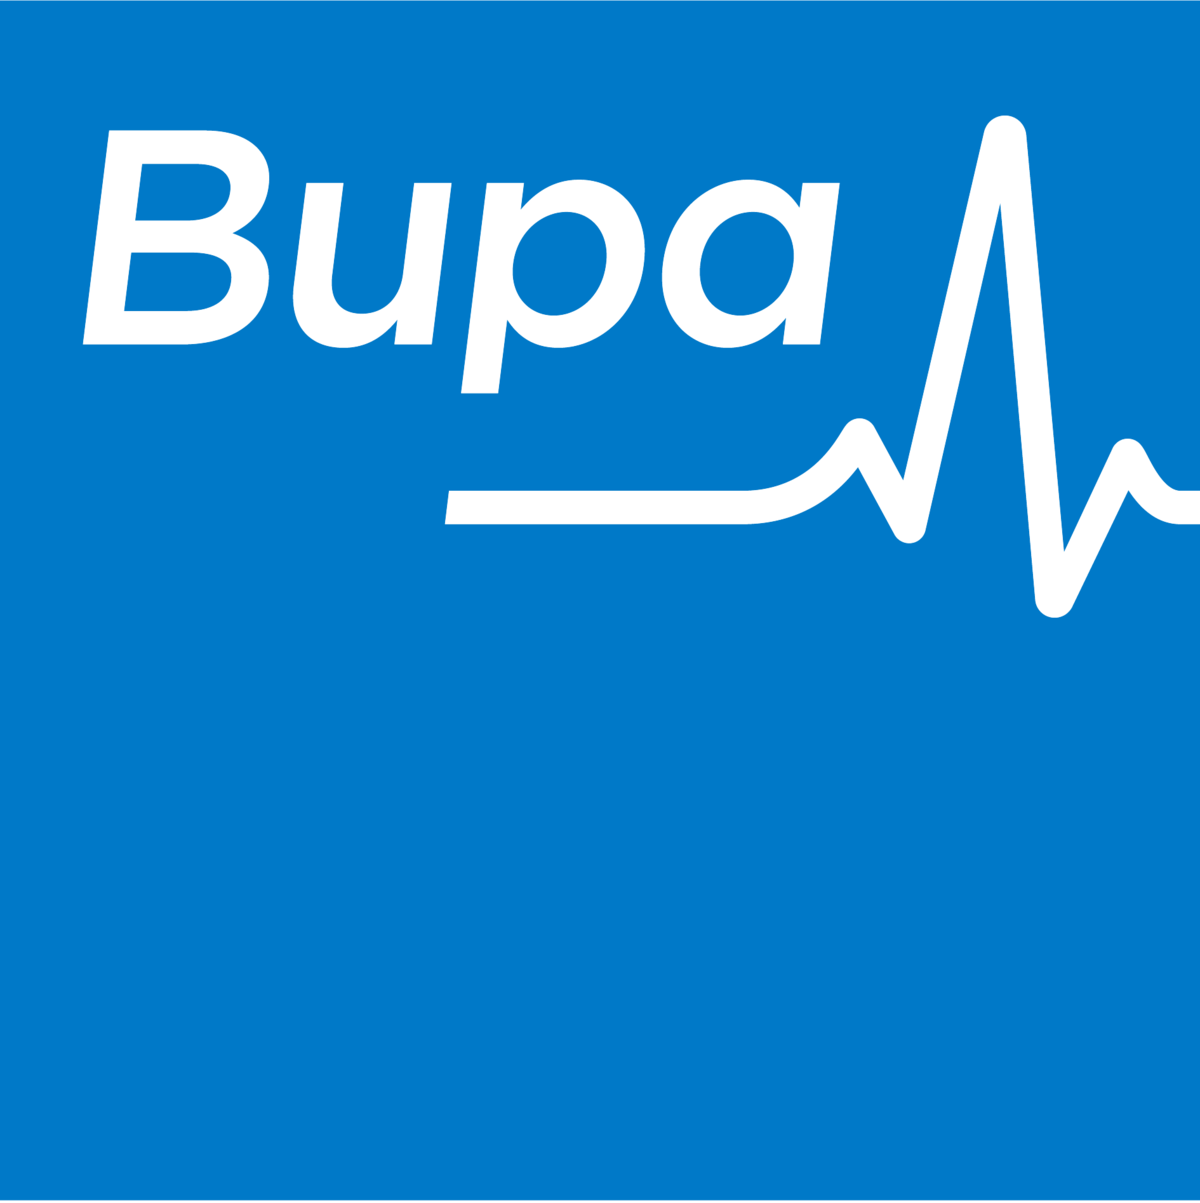 Bupa - one of the leading insurance companies in the UK